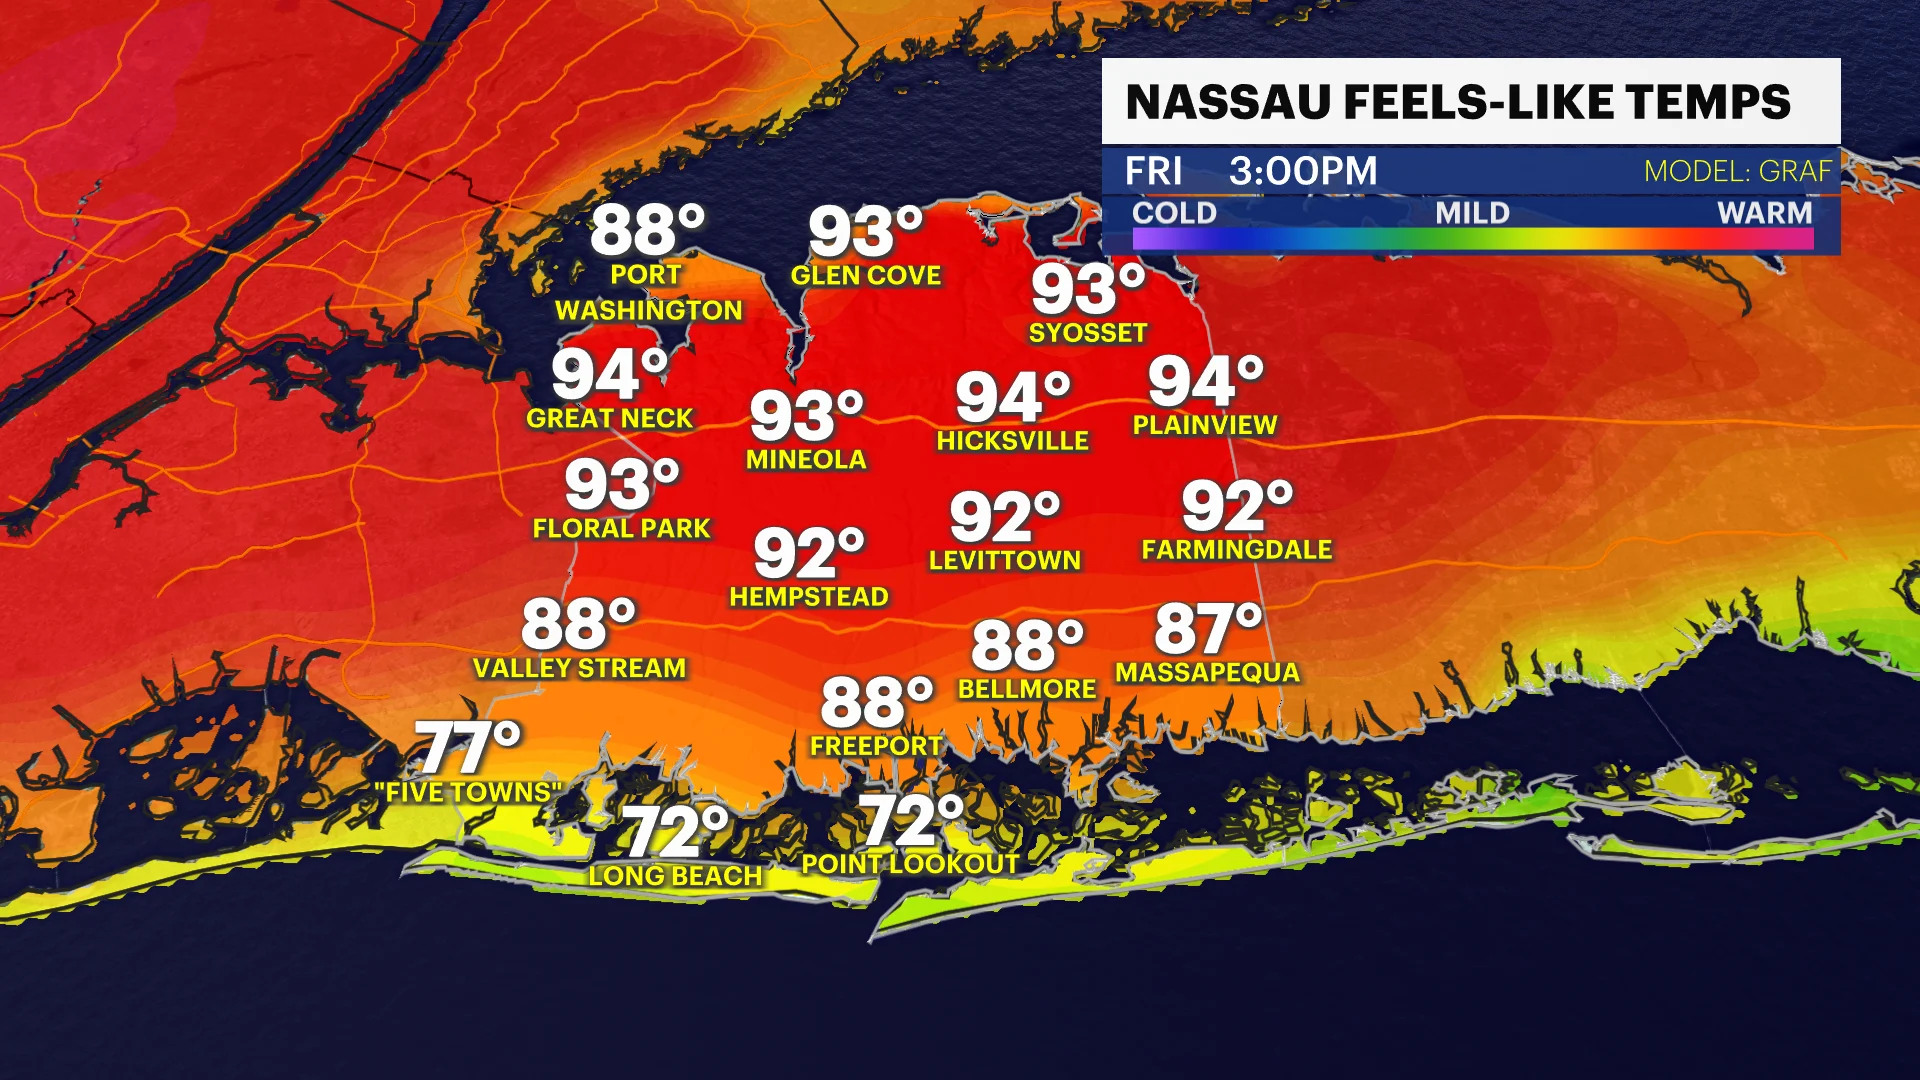 HEAT ALERT: Steamy weather continues with feel-like temps between 87 to 93